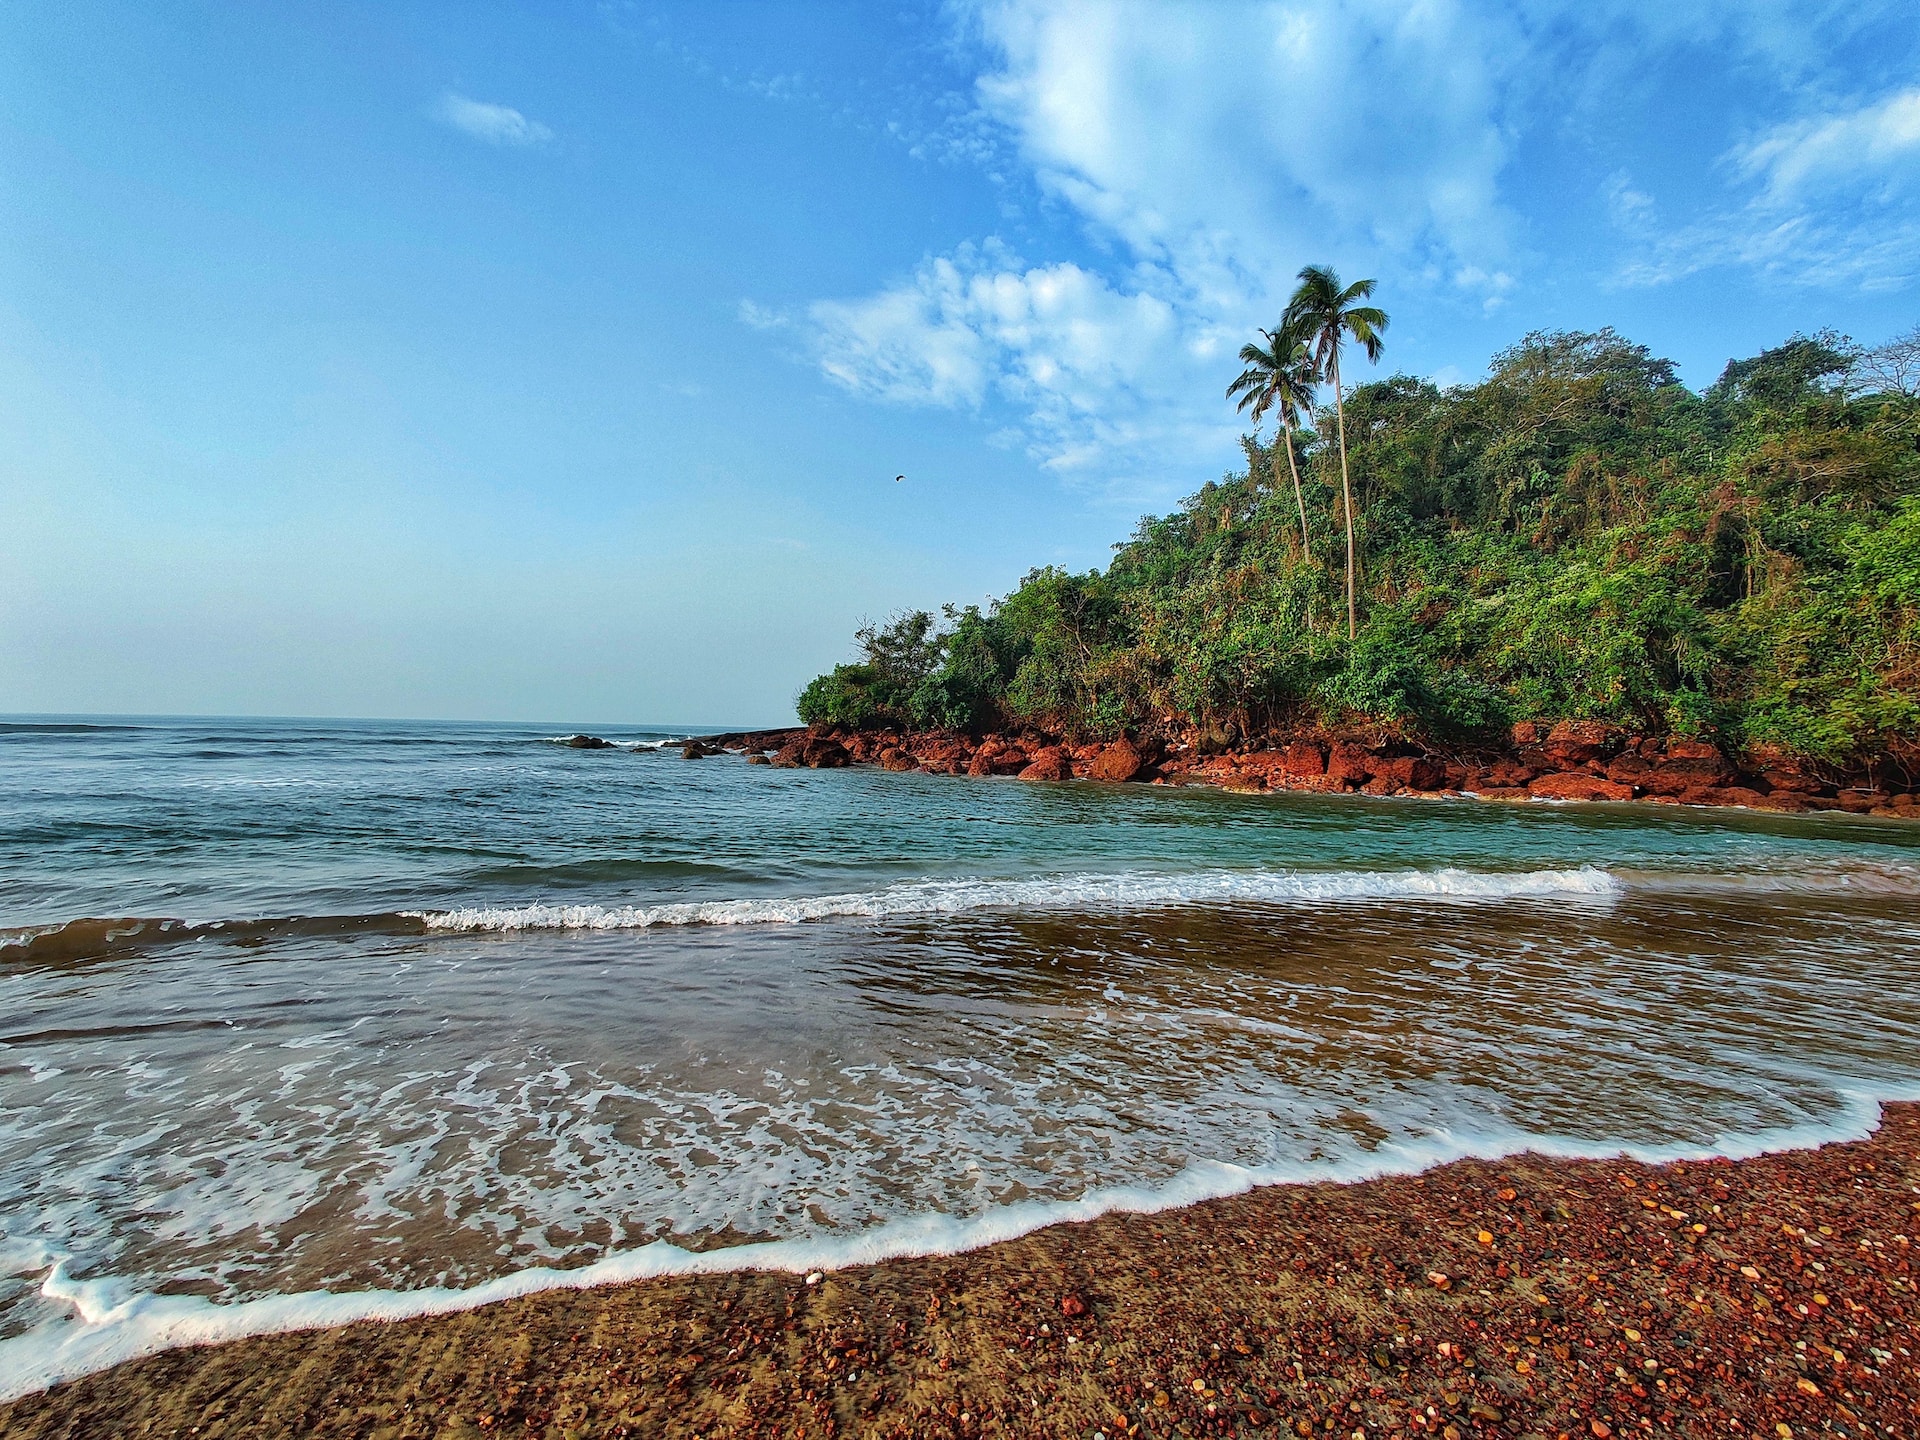 Planning a beach-hopping trip in Kerala? We have the perfect list of ‘crowd-free’ beaches for you